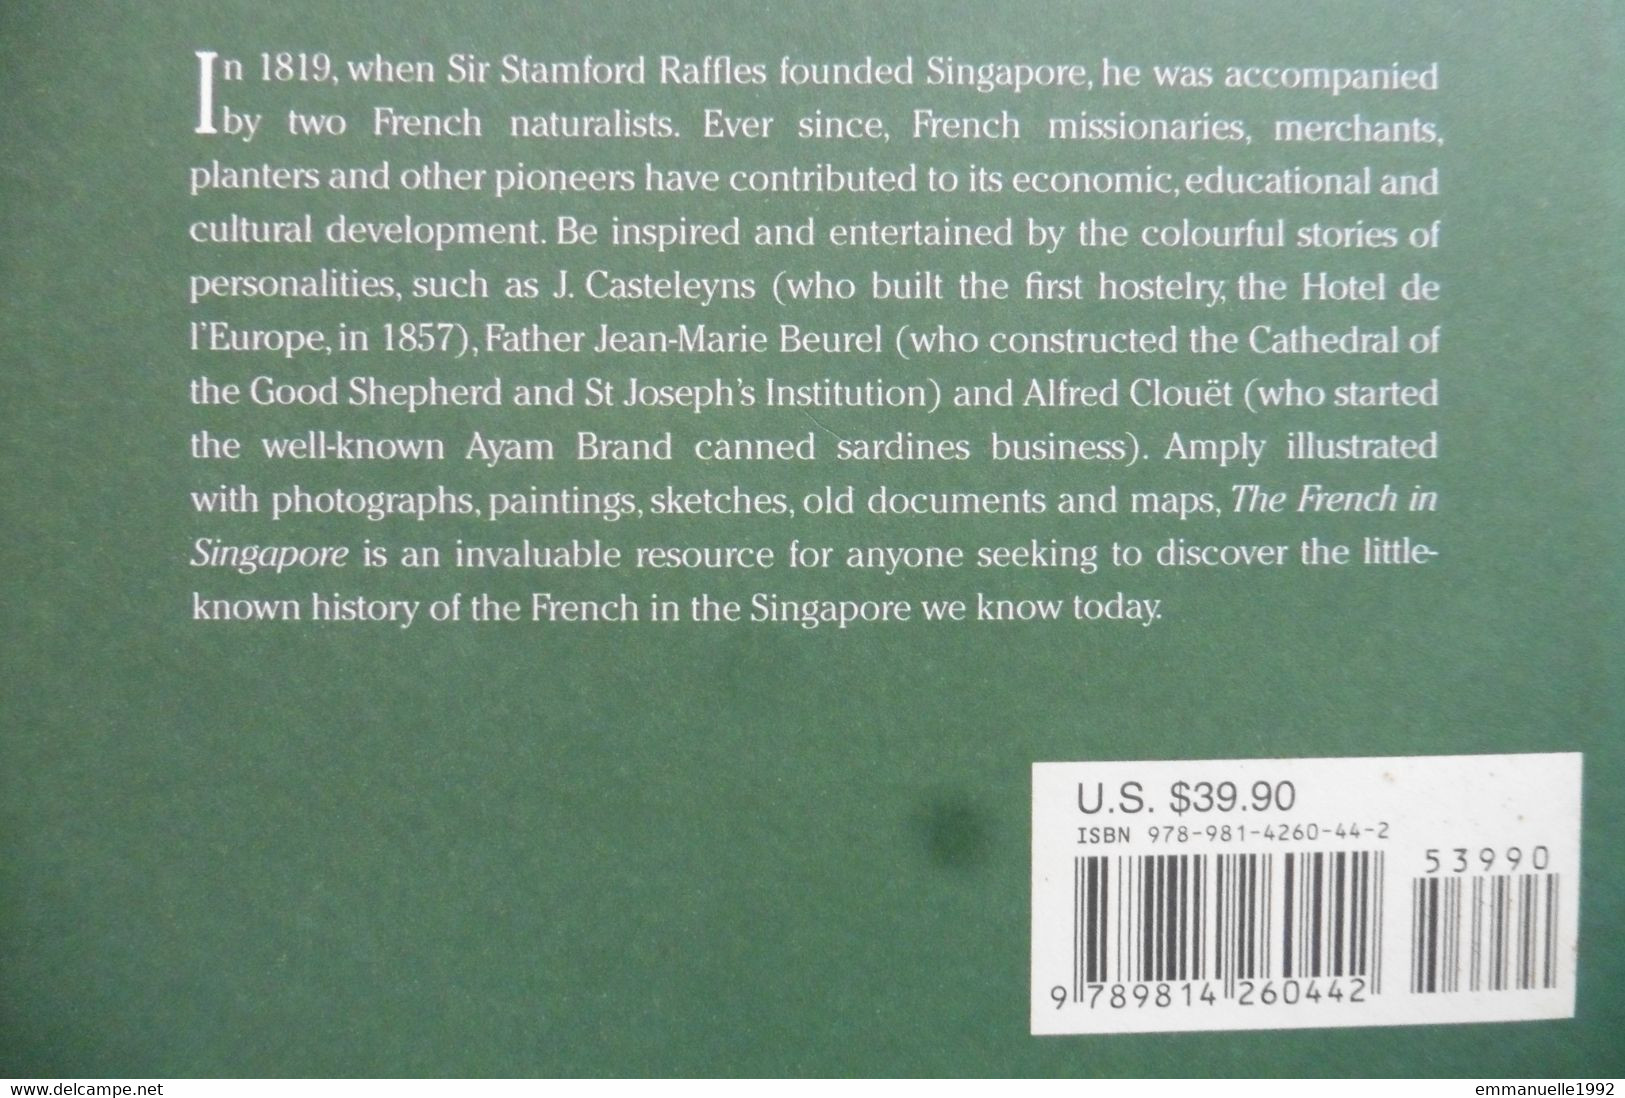 Book The French In Singapore, An Illustrated History 1819-today - Pilon Weiler 2011 - Asia